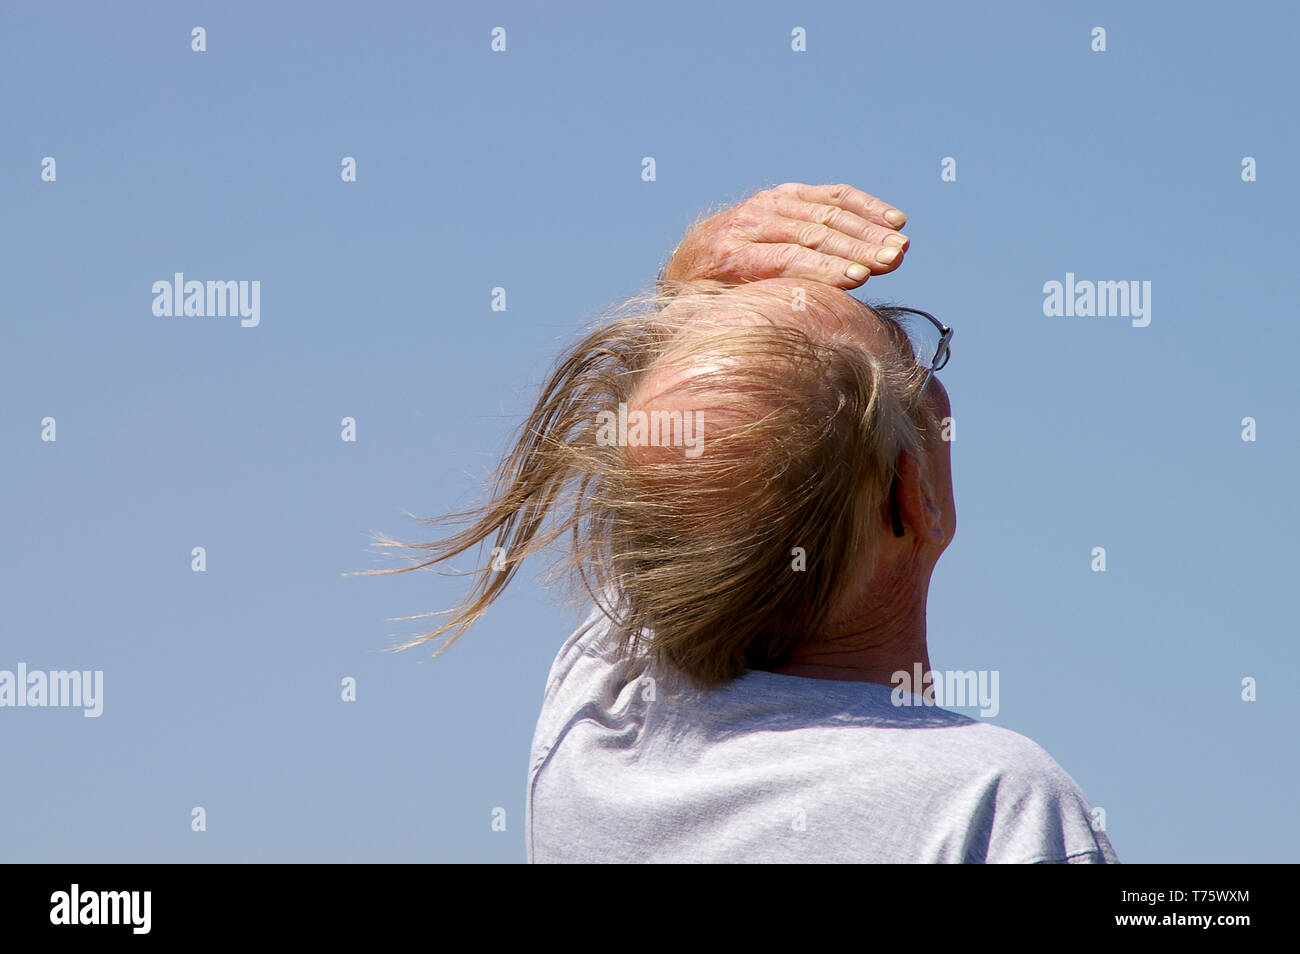 White middle aged or old male with comb over hairstyle blowing in the wind. Man outside on a windy day with bald pate and long side hair blown around Stock Photo